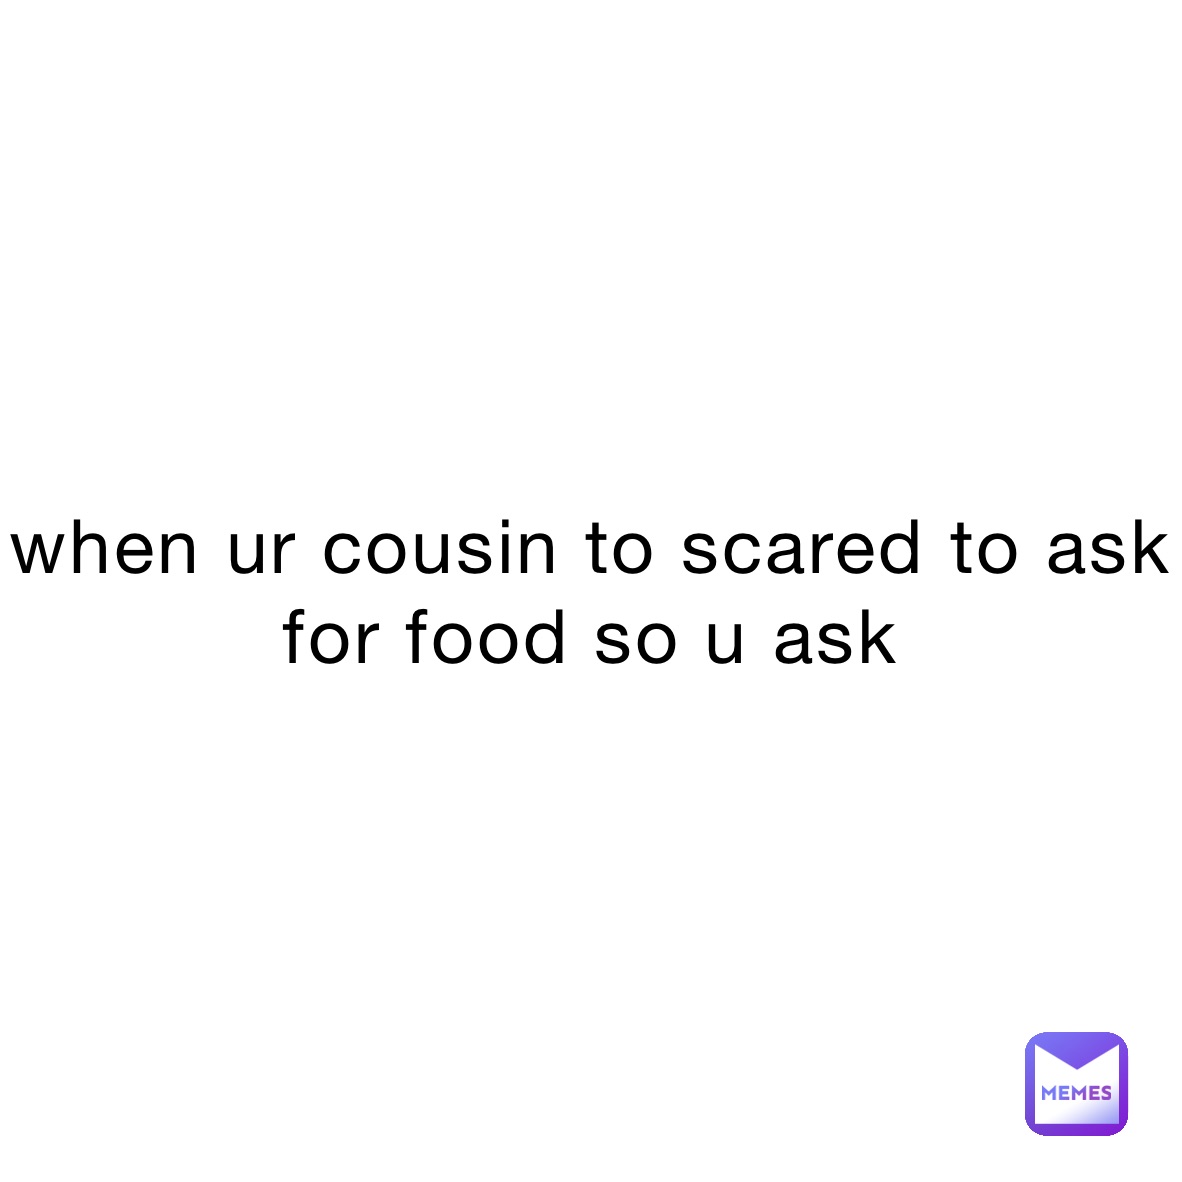 when ur cousin to scared to ask for food so u ask